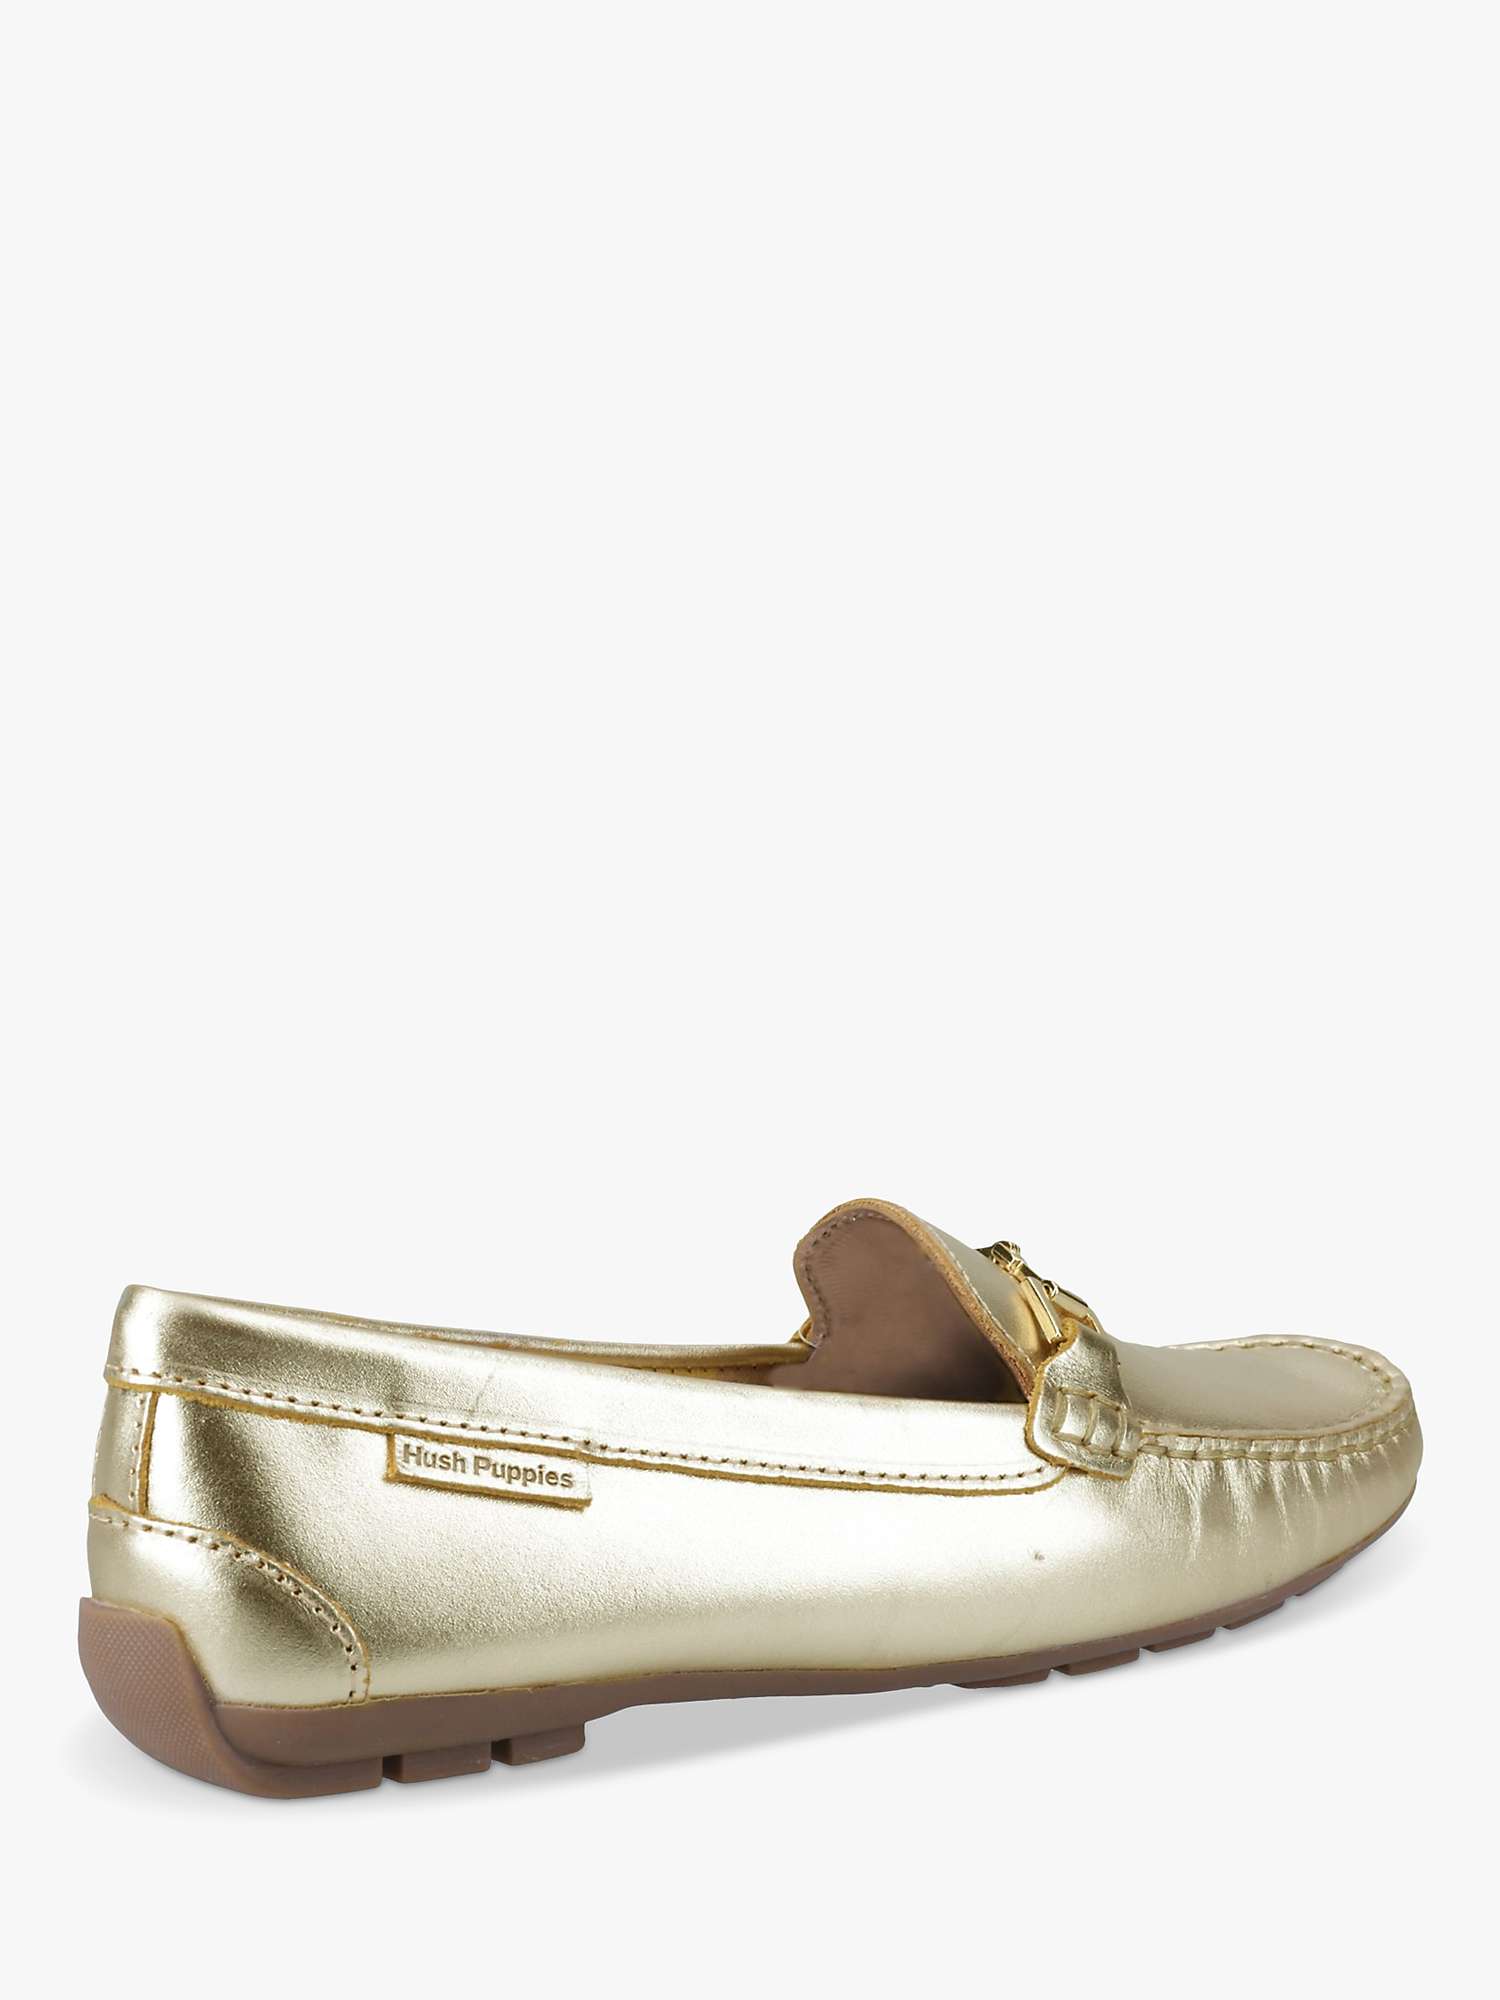 Buy Hush Puppies Eleanor Leather Loafers Online at johnlewis.com